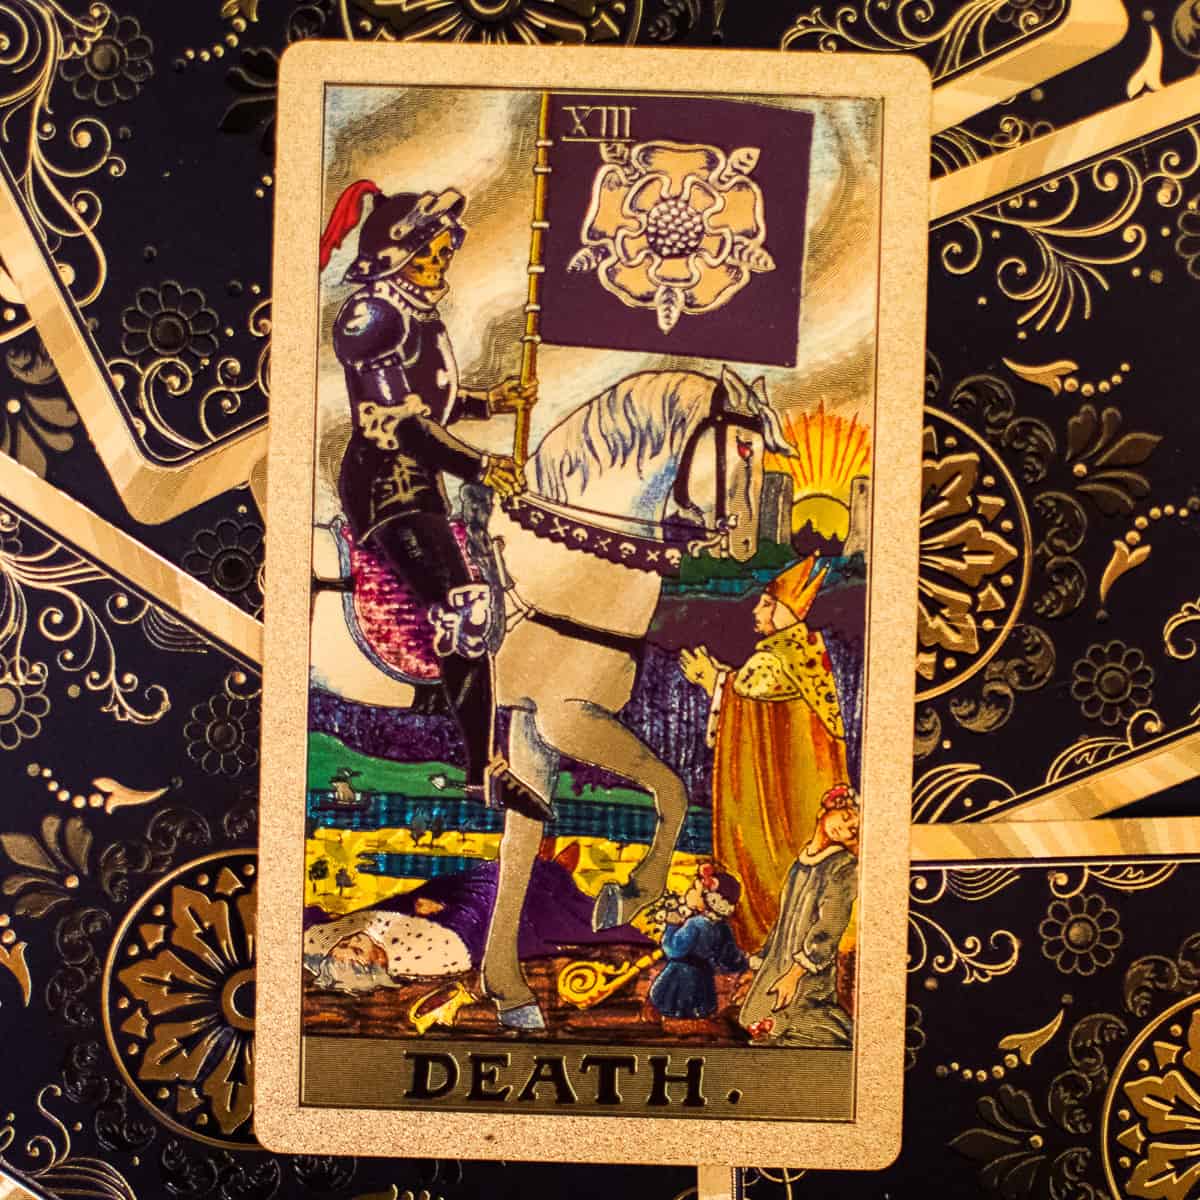 The figure known as Death, riding a horse with people at the ground depicted on a tarot card.